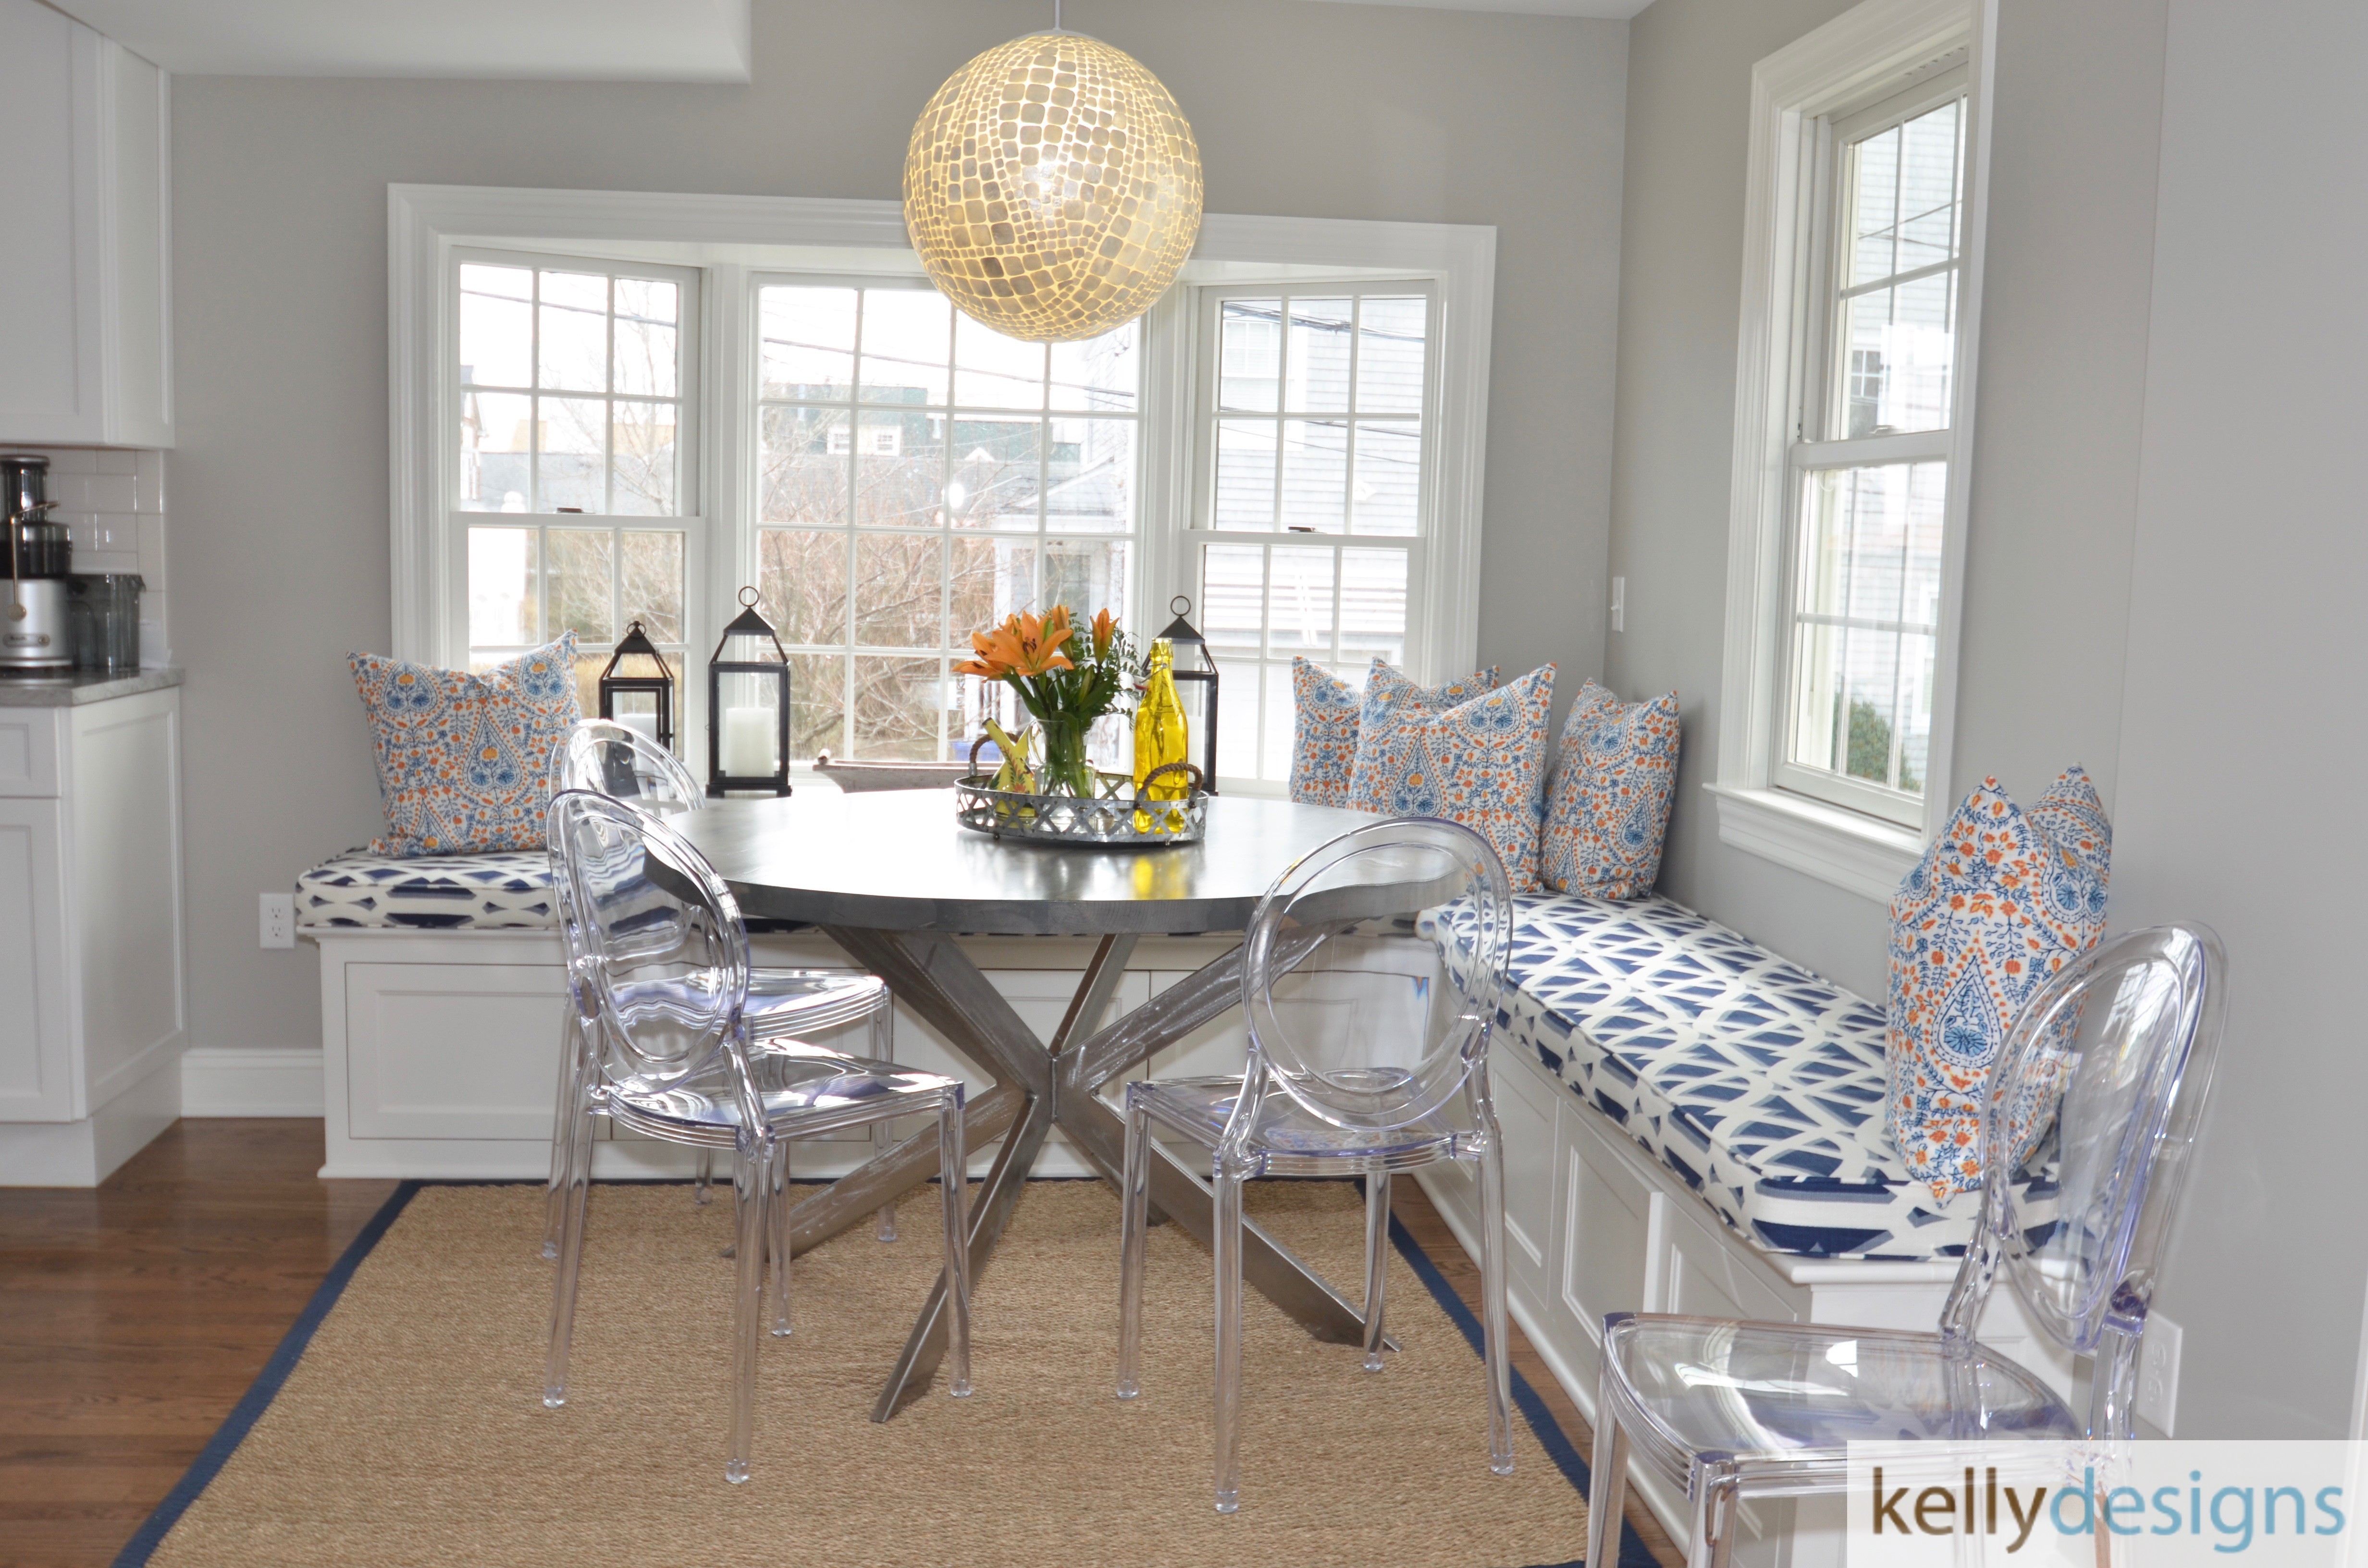 We added this cozy banquette with some bright colors from John Robshaw to make this kitchen nook a family favorite.